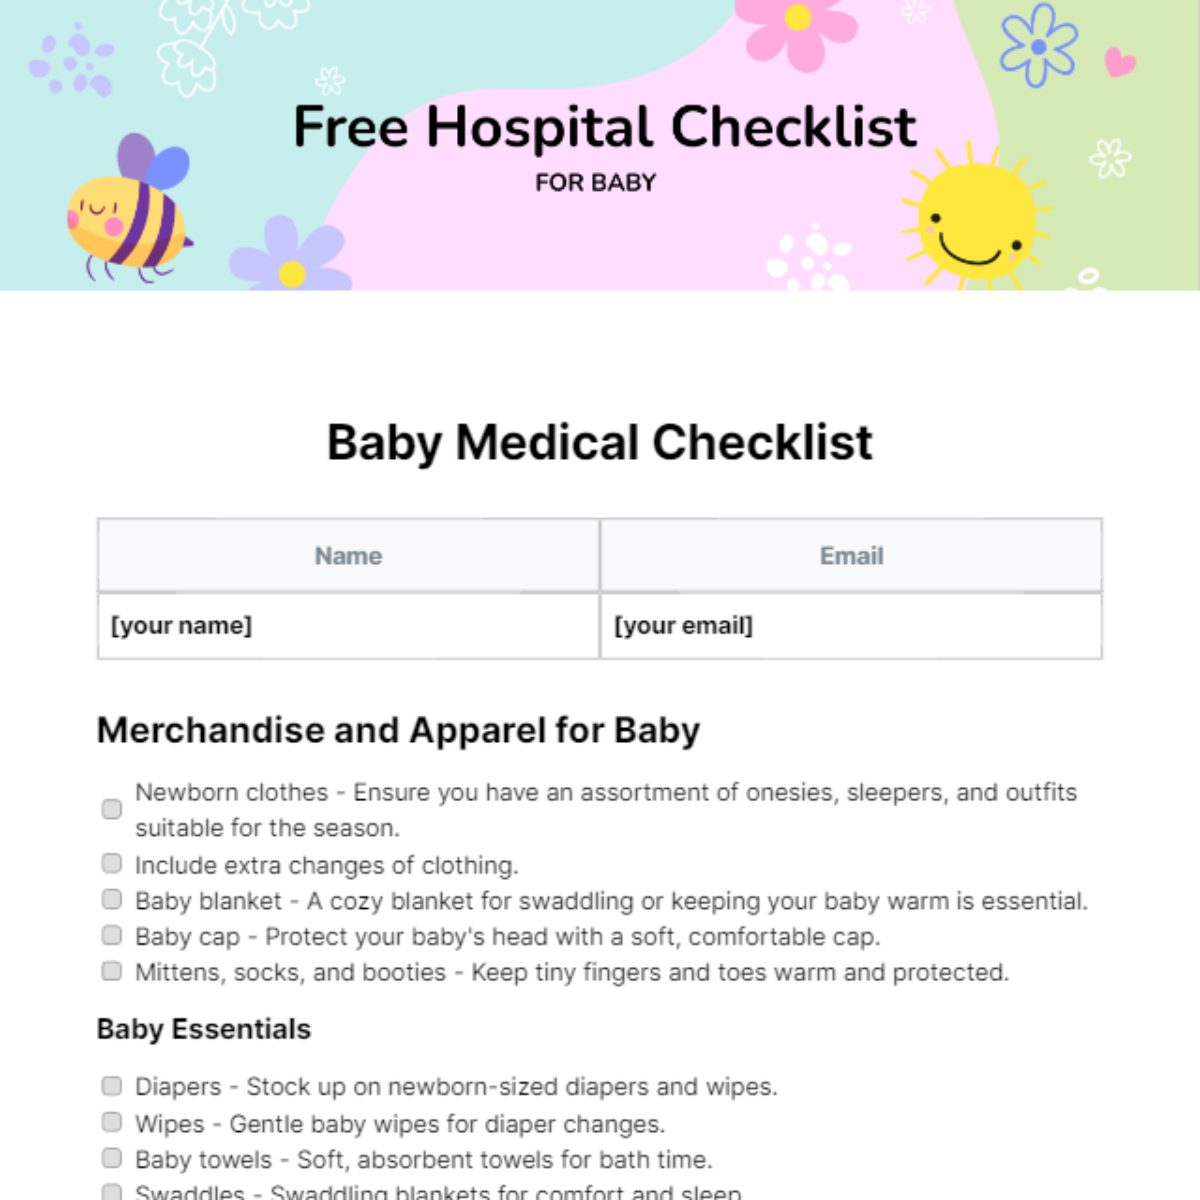 Free Hospital Checklist for Baby Template